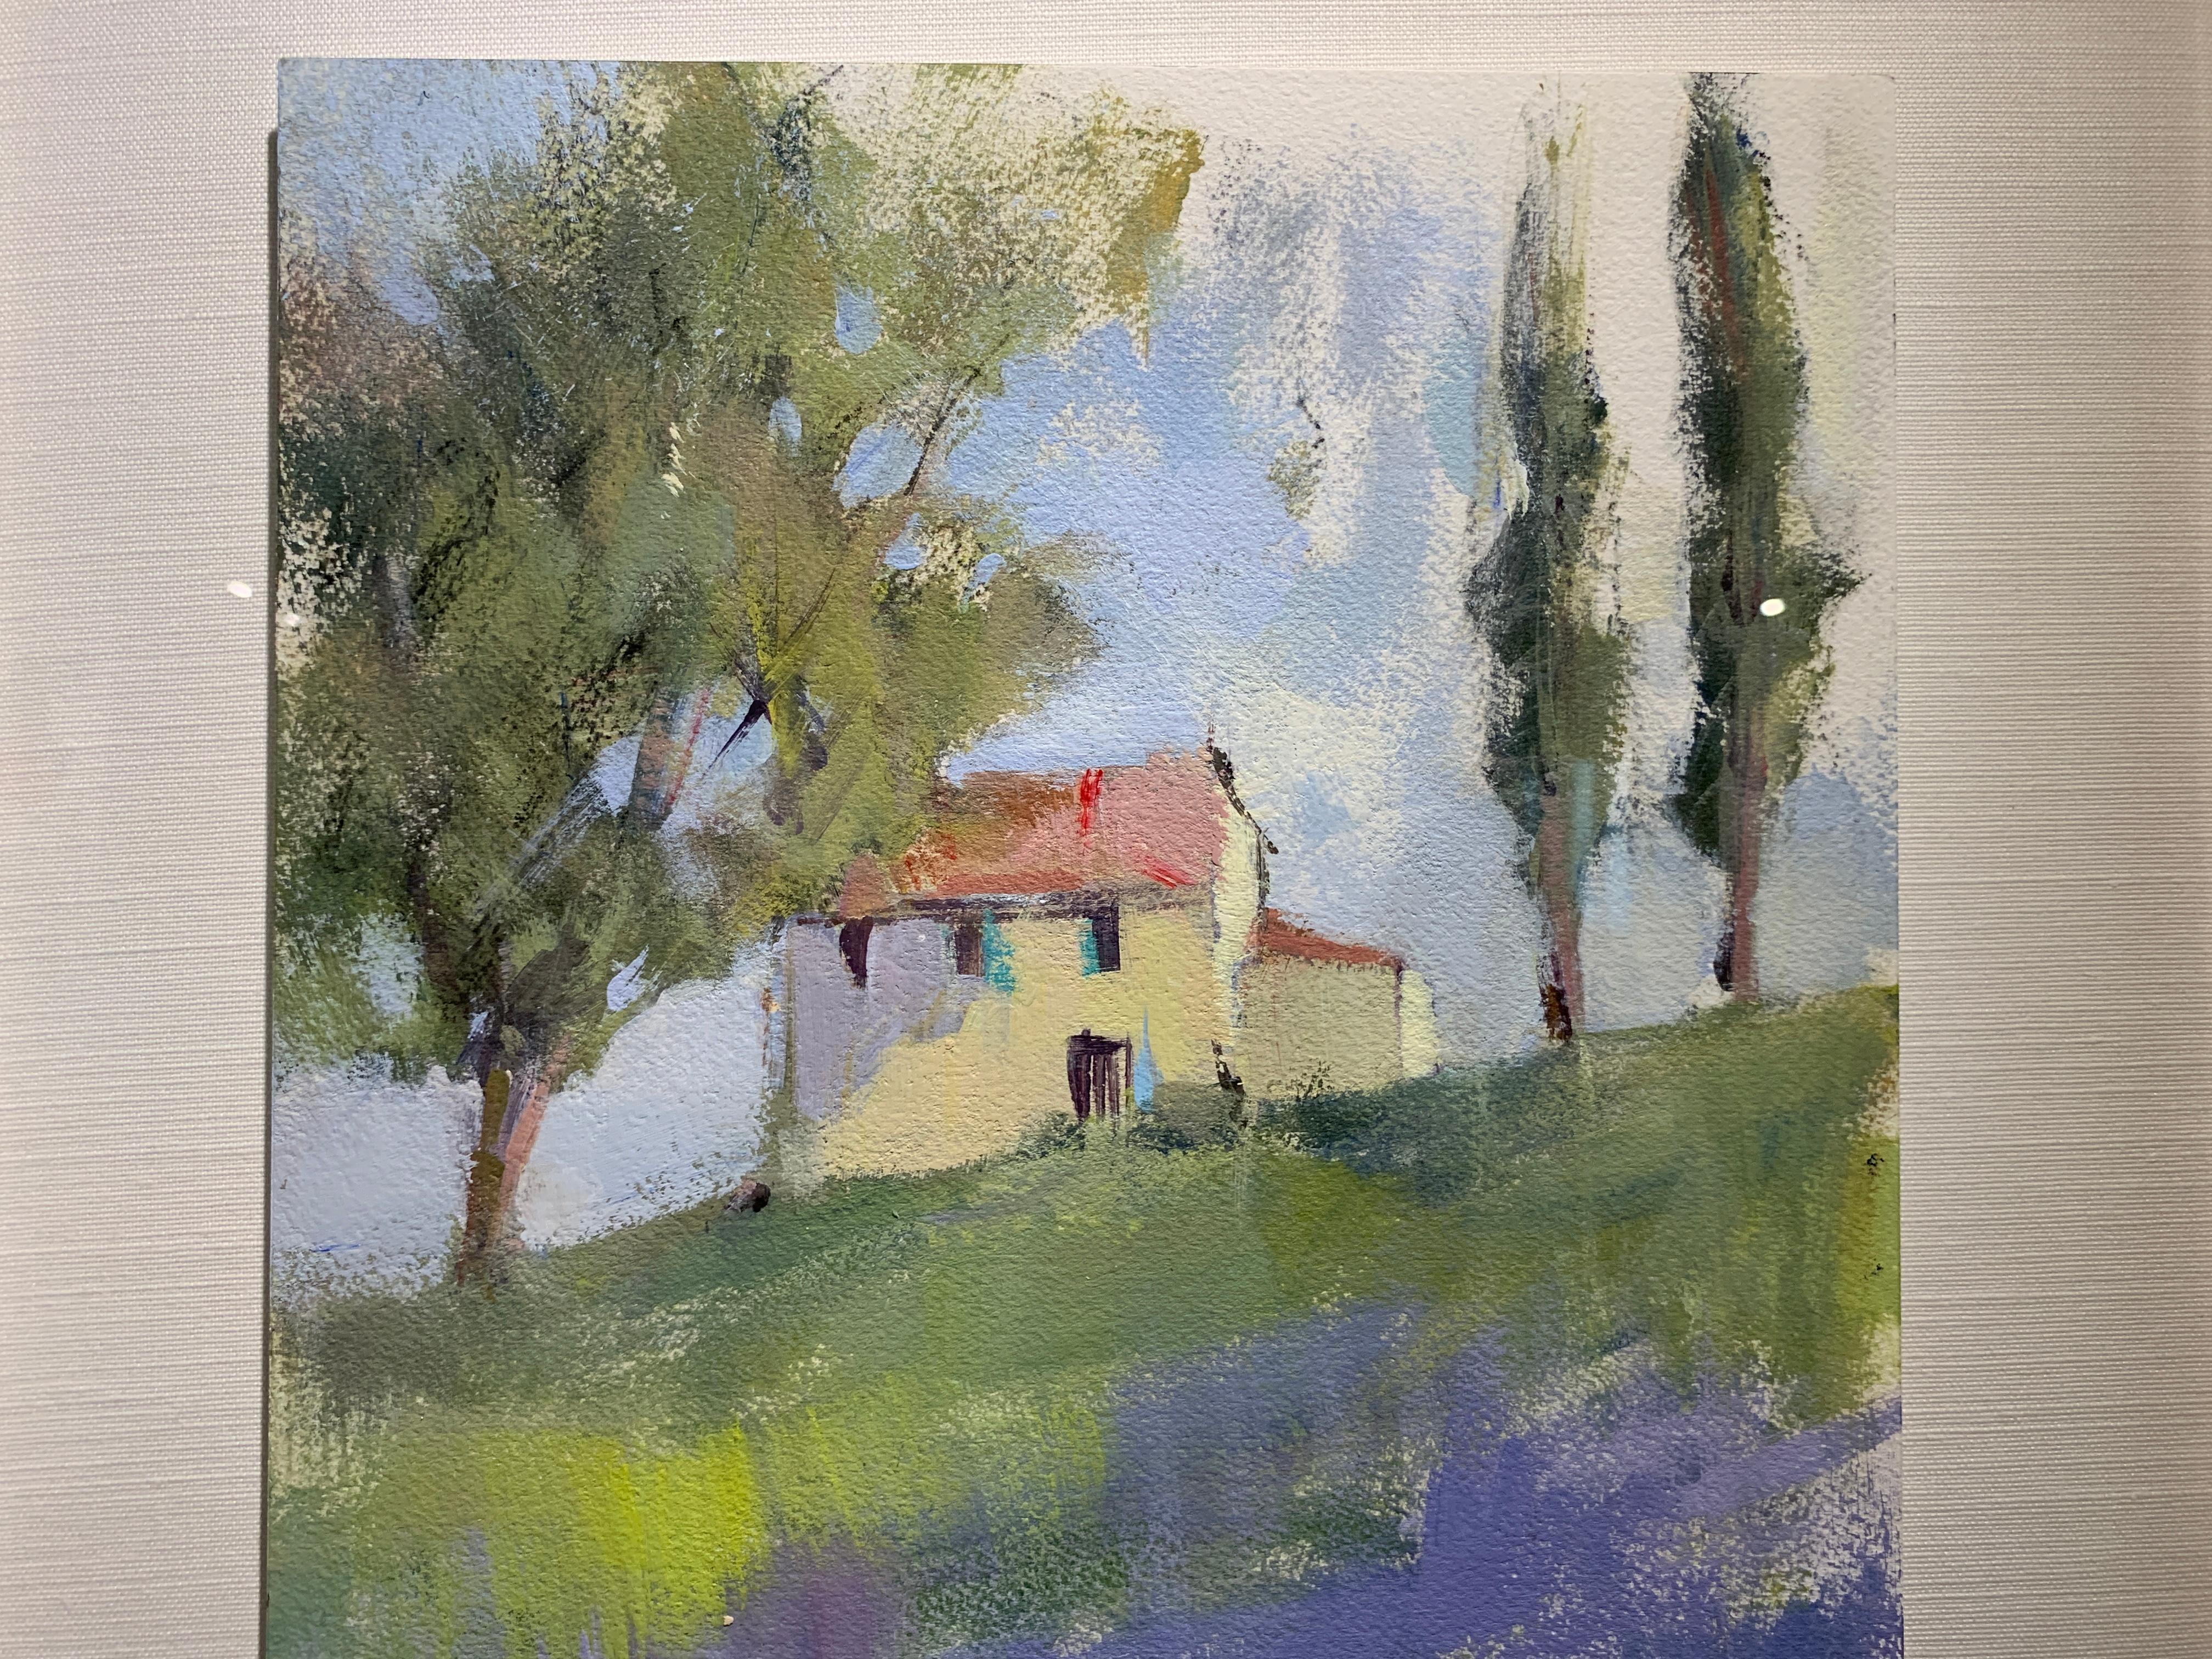 'Near Gordes' is a small framed acrylic on Arches cold press paper Impressionist landscape painting created by American artist Nancy Franke in 2019. Featuring a palette made of green, purple and blue tones among others, this painting depicts a soft